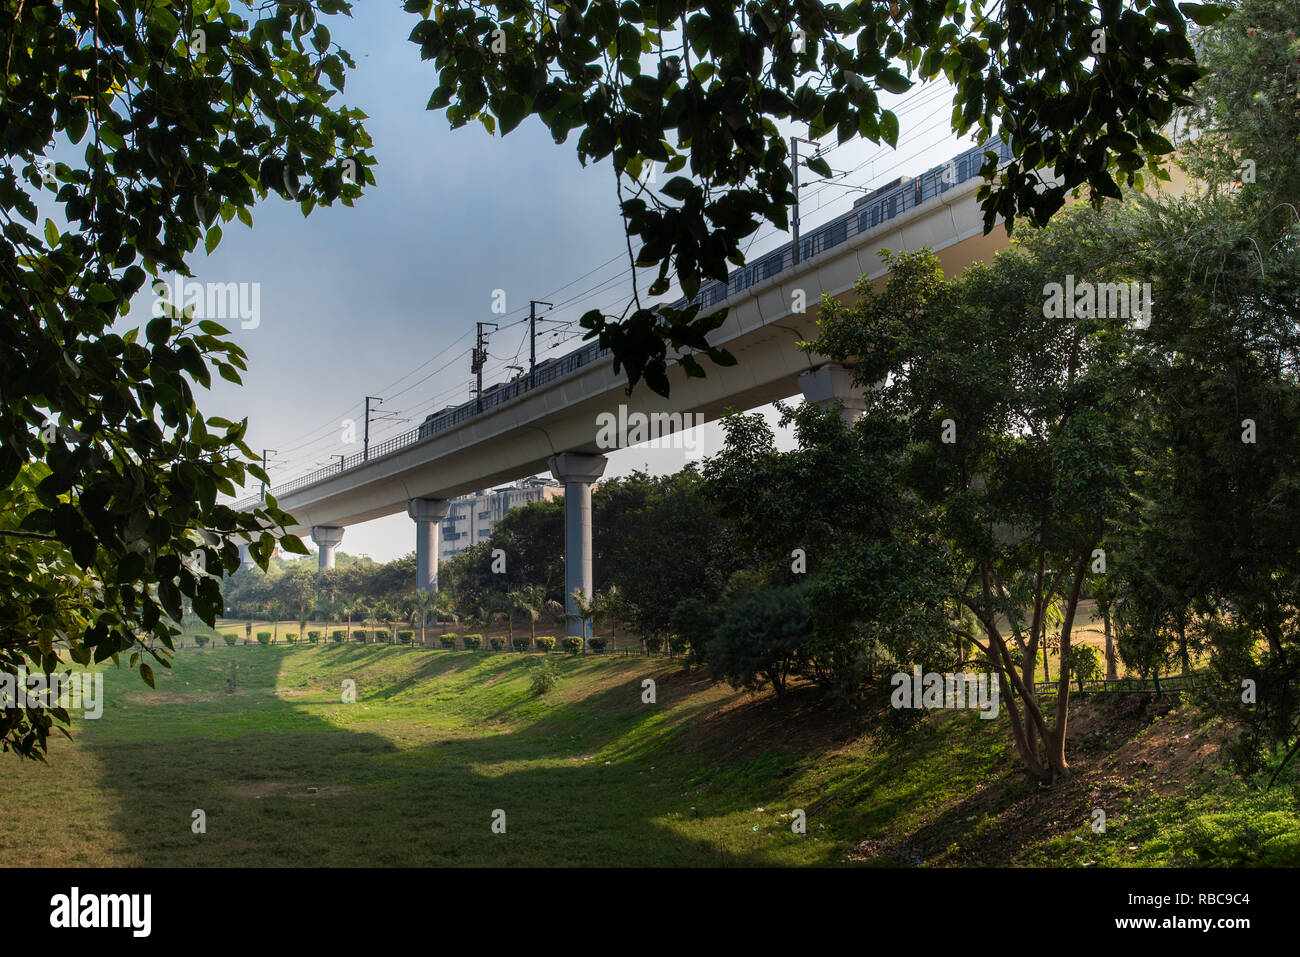 View of elevated metro structure from Astha Kunj Park near Nehru Place framed by trees with Metro train going towards Badarpur, New Delhi, India Stock Photo